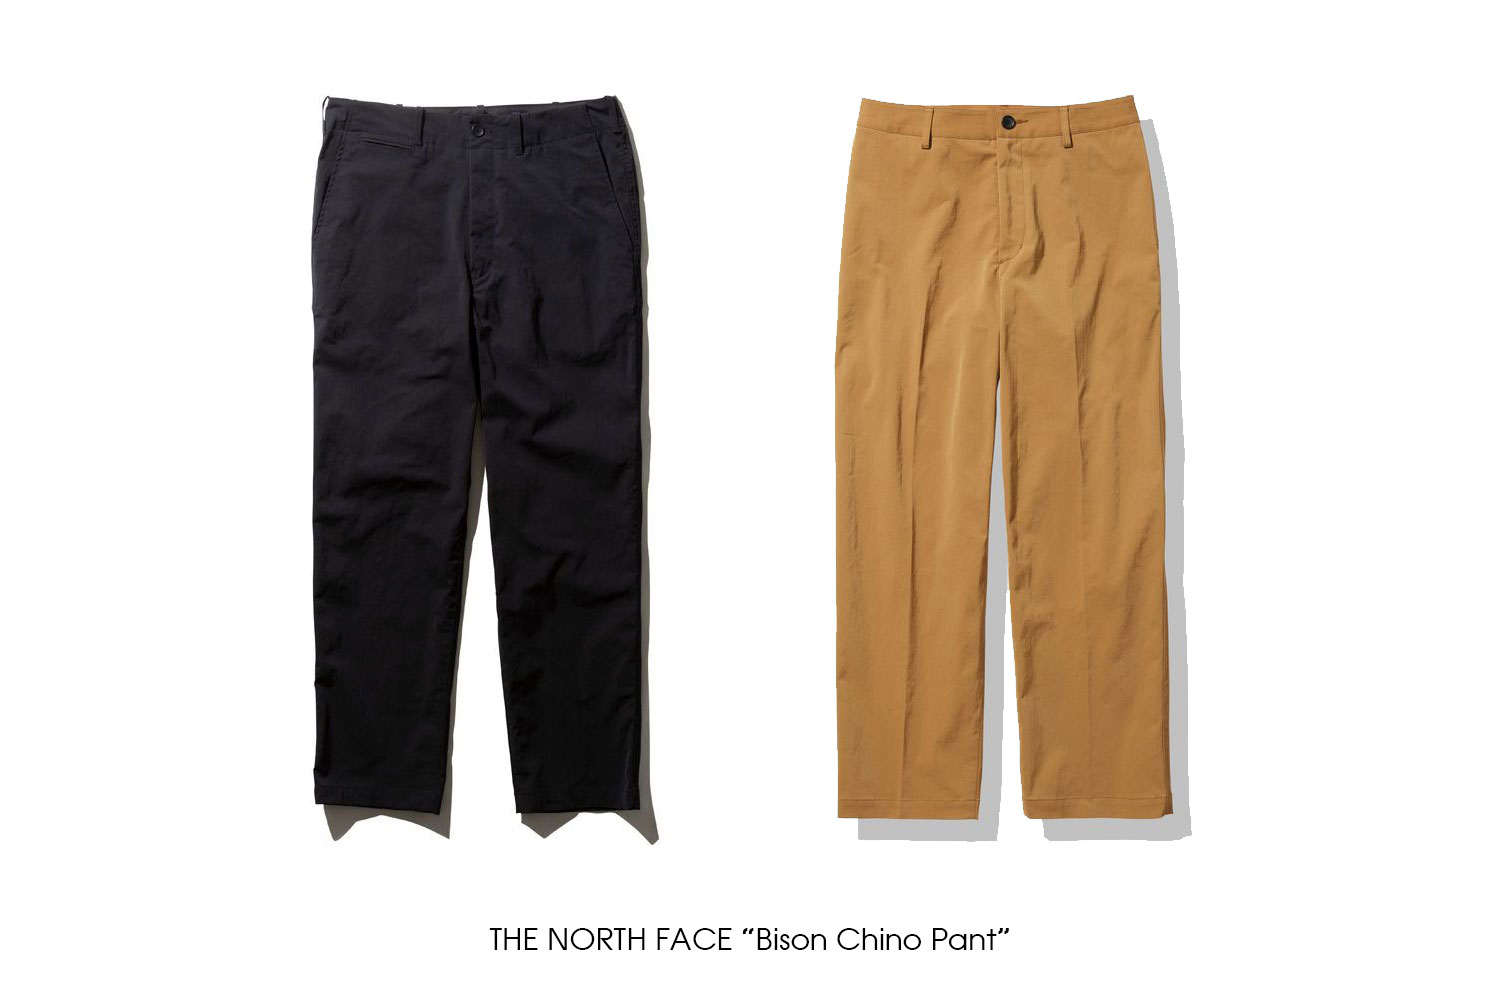 THE NORTH FACE "Bison Chino Pant"